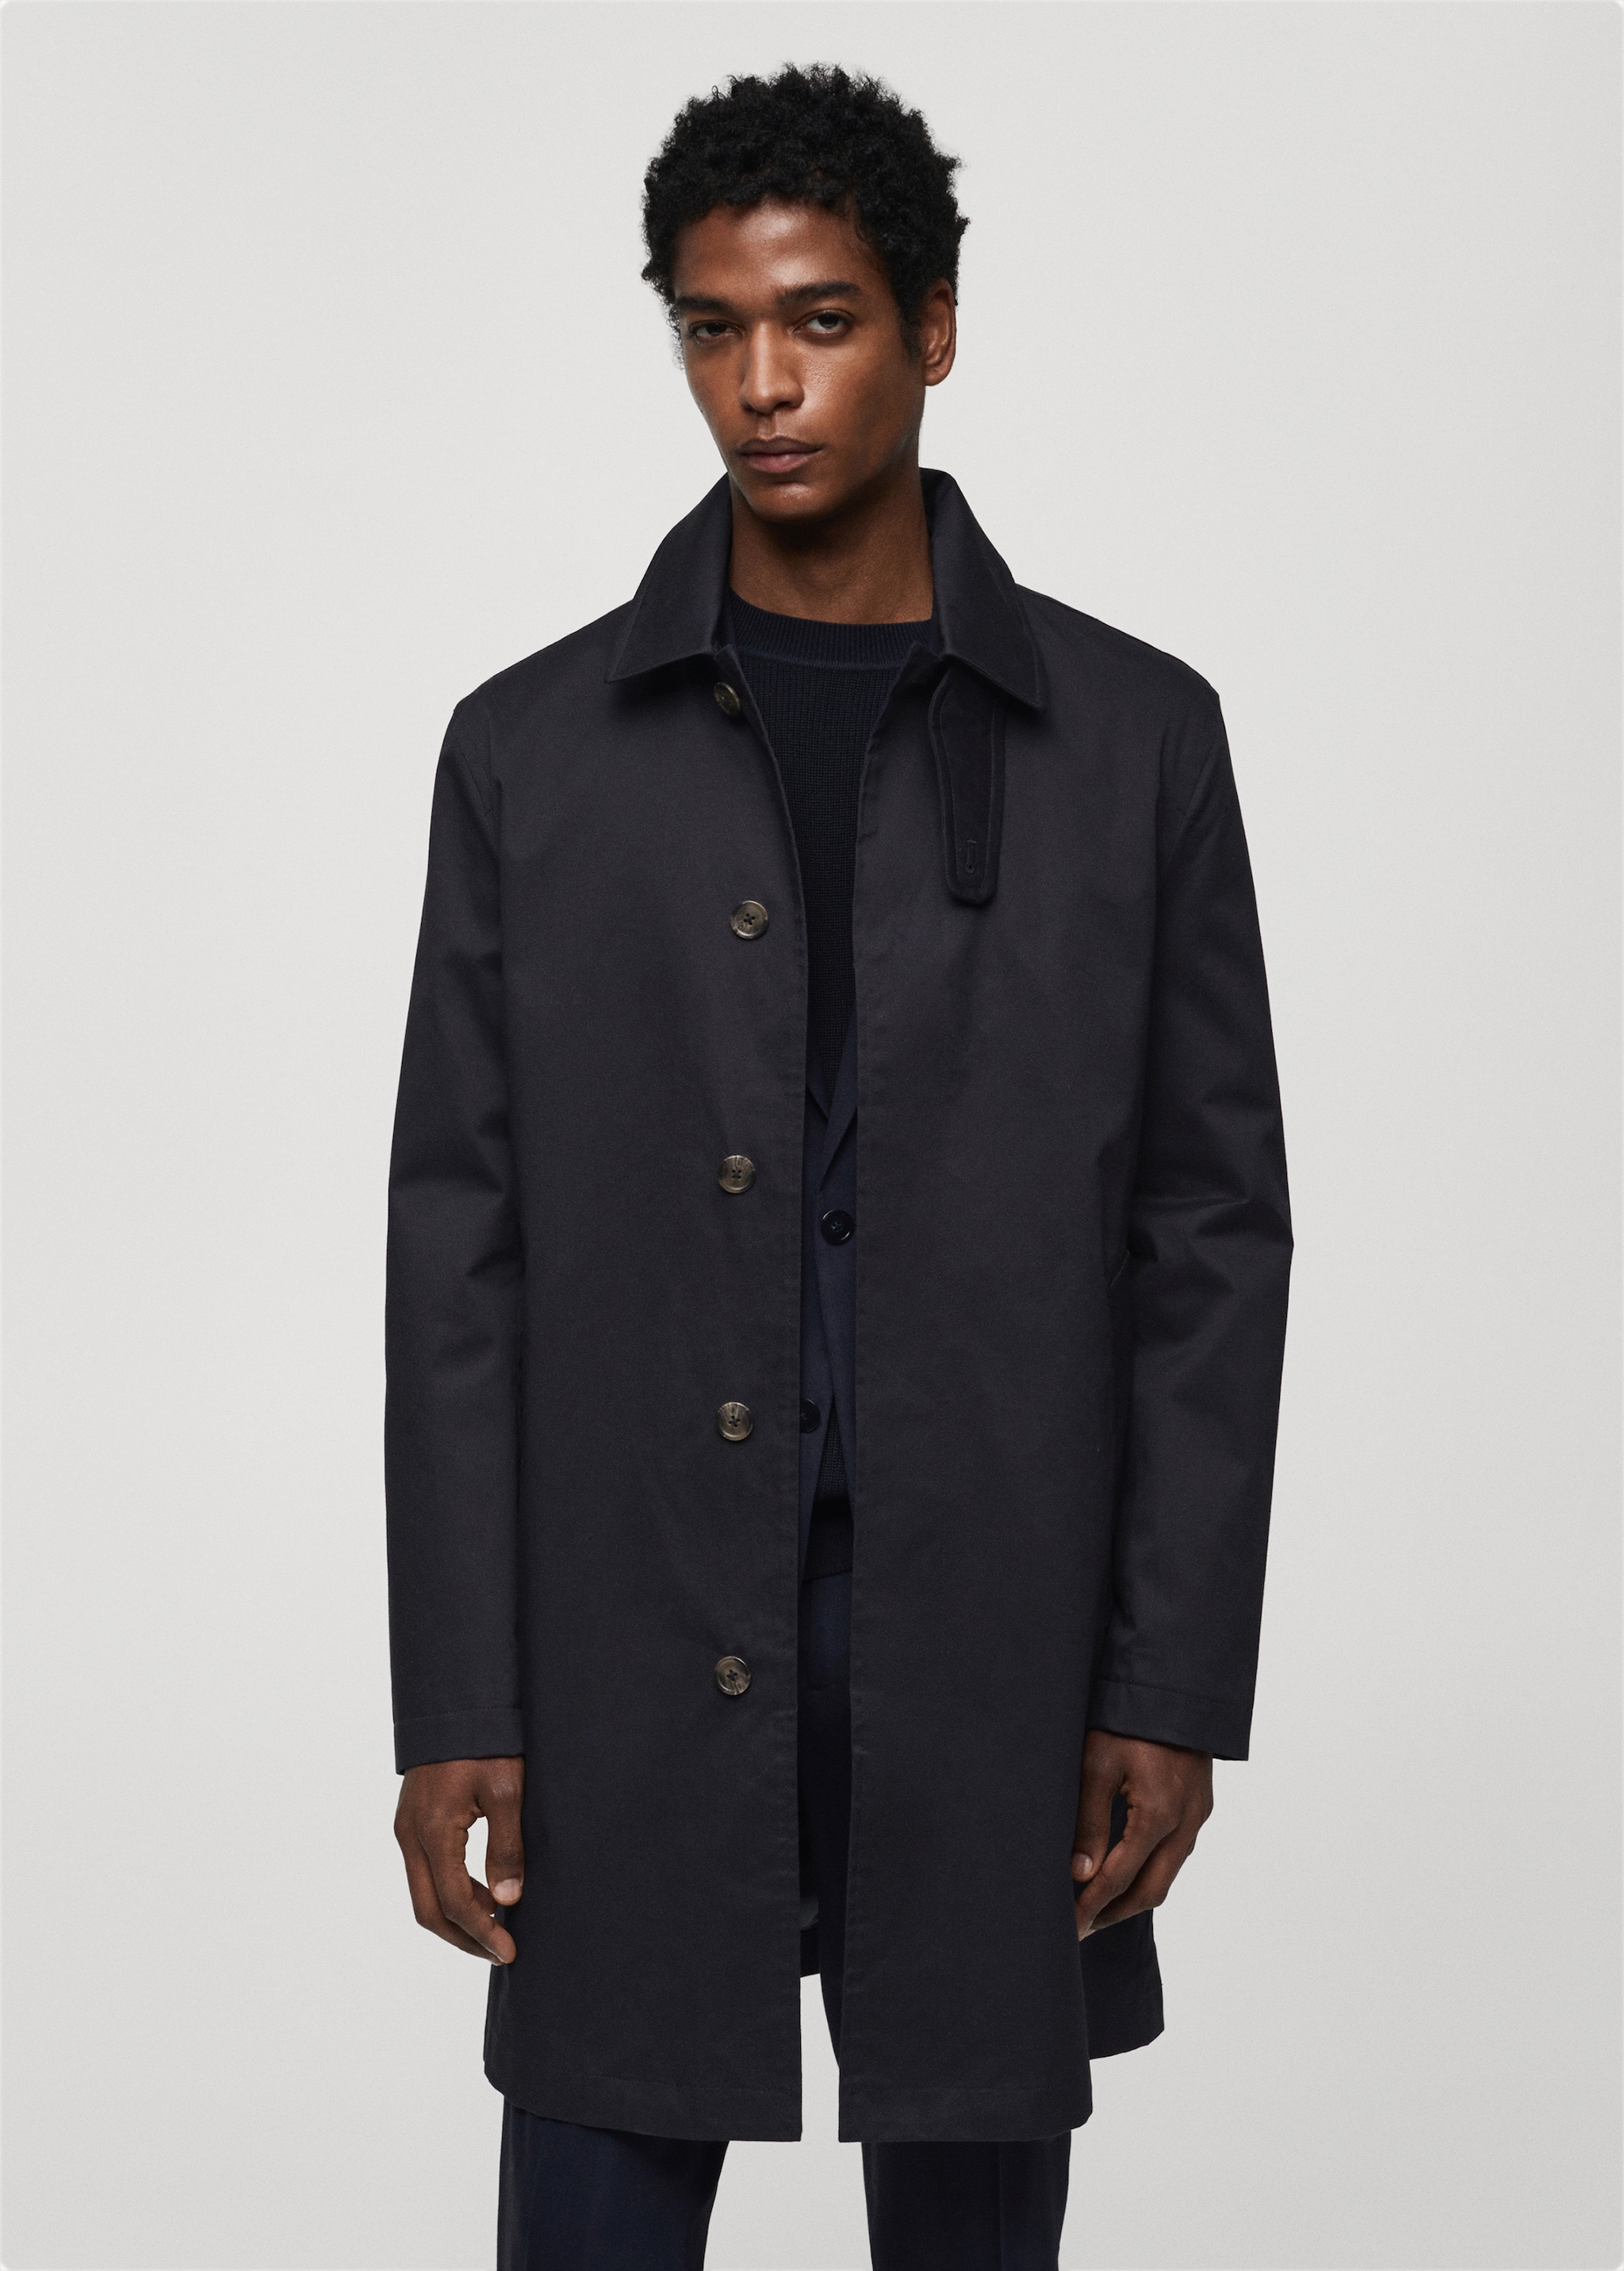 Cotton trench coat with collar detail - Medium plane